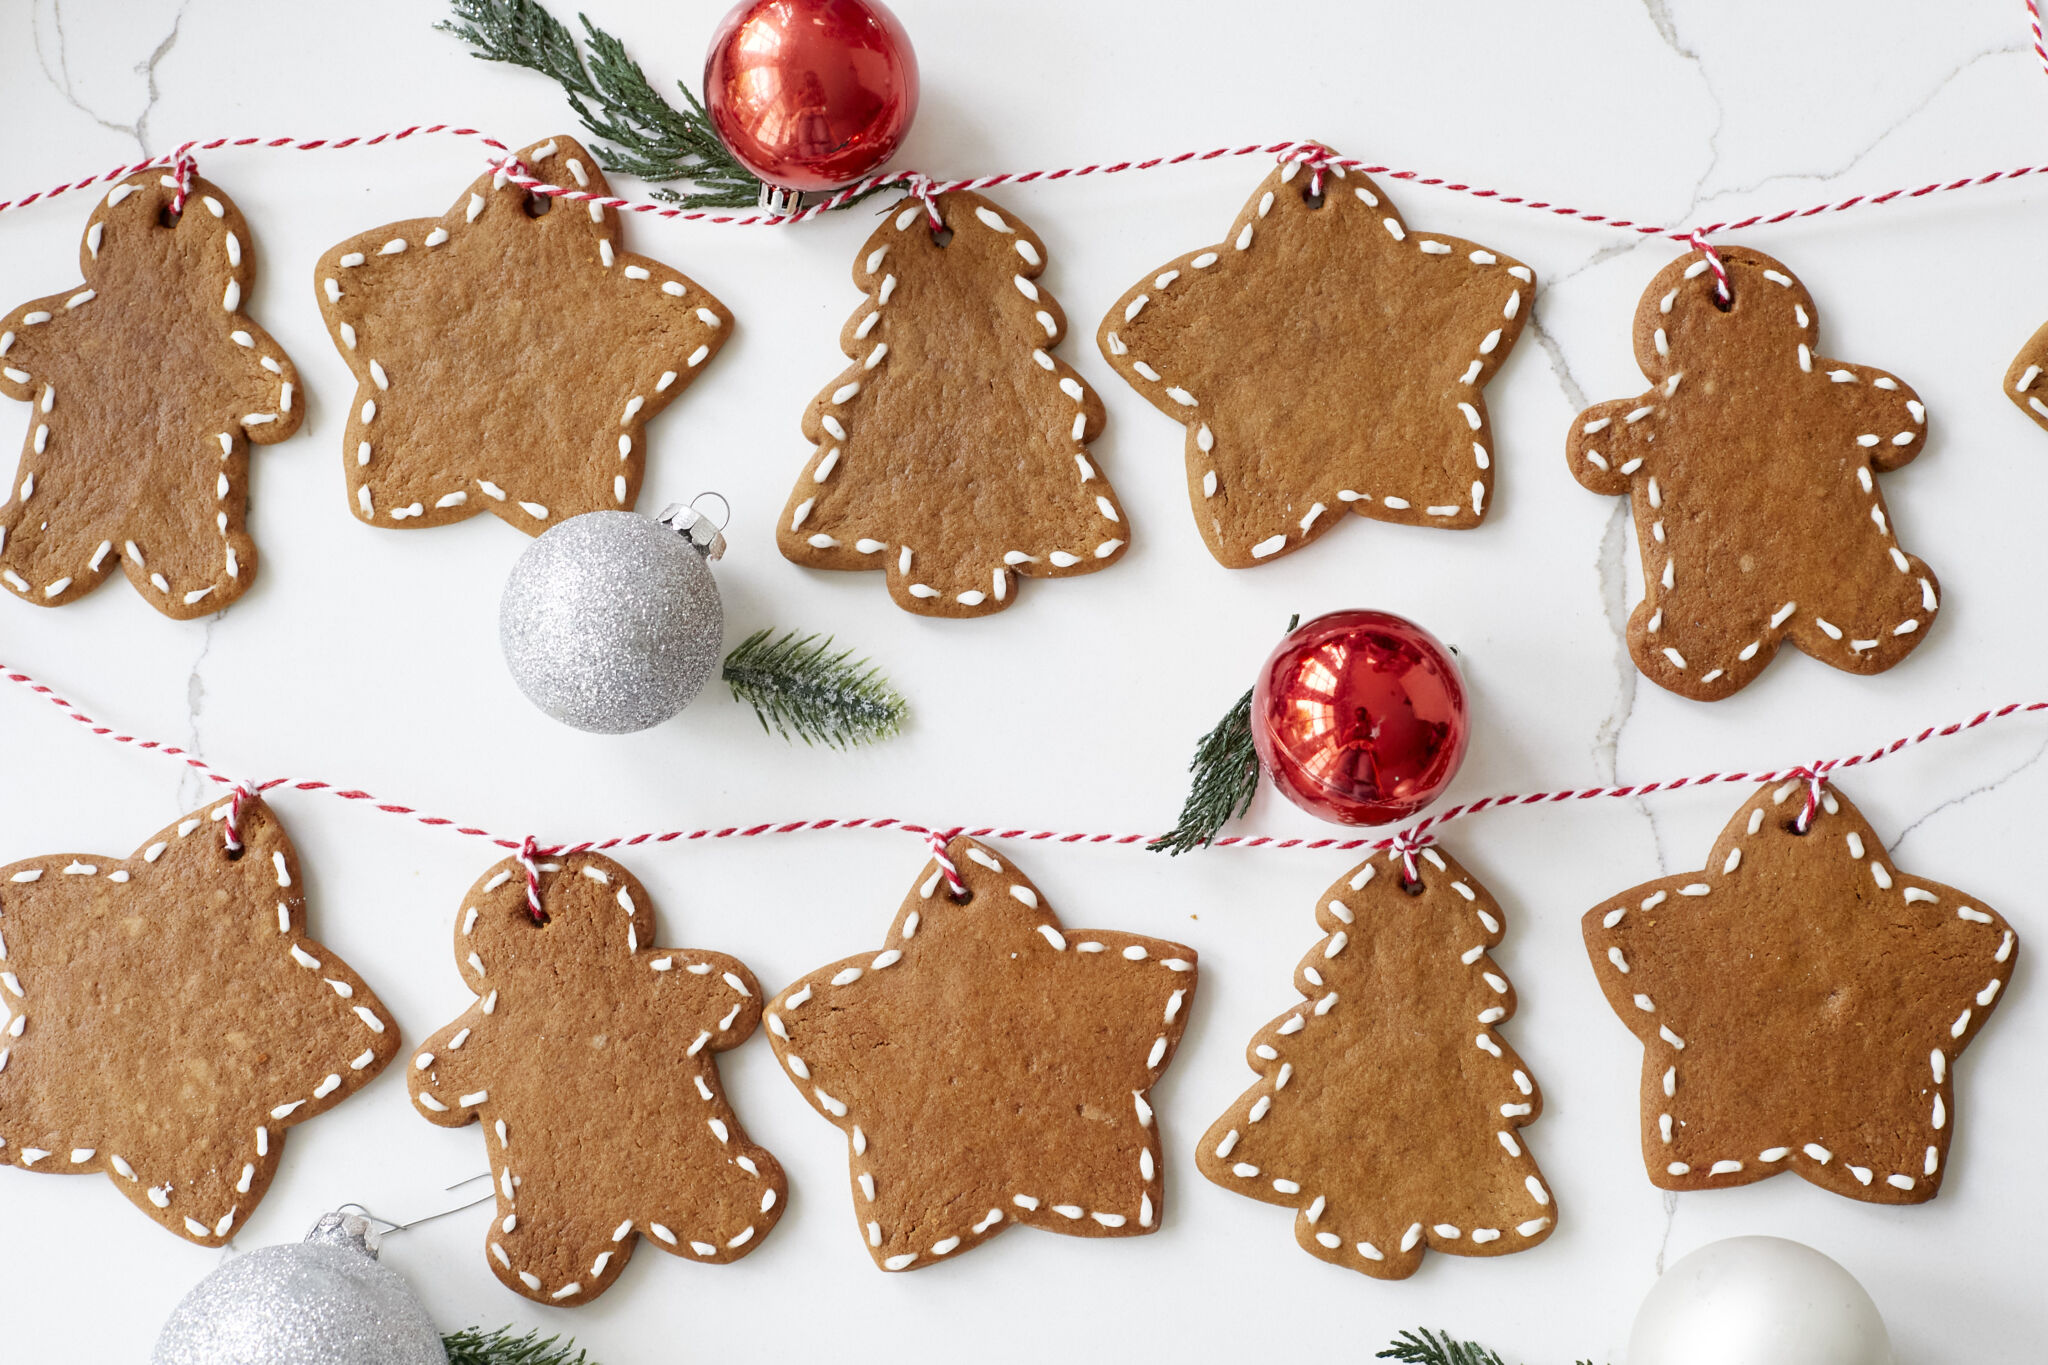 Gingerbread Cookies are baked until brown and iced with white icing on the edges. They're strung together with a red-white twine.